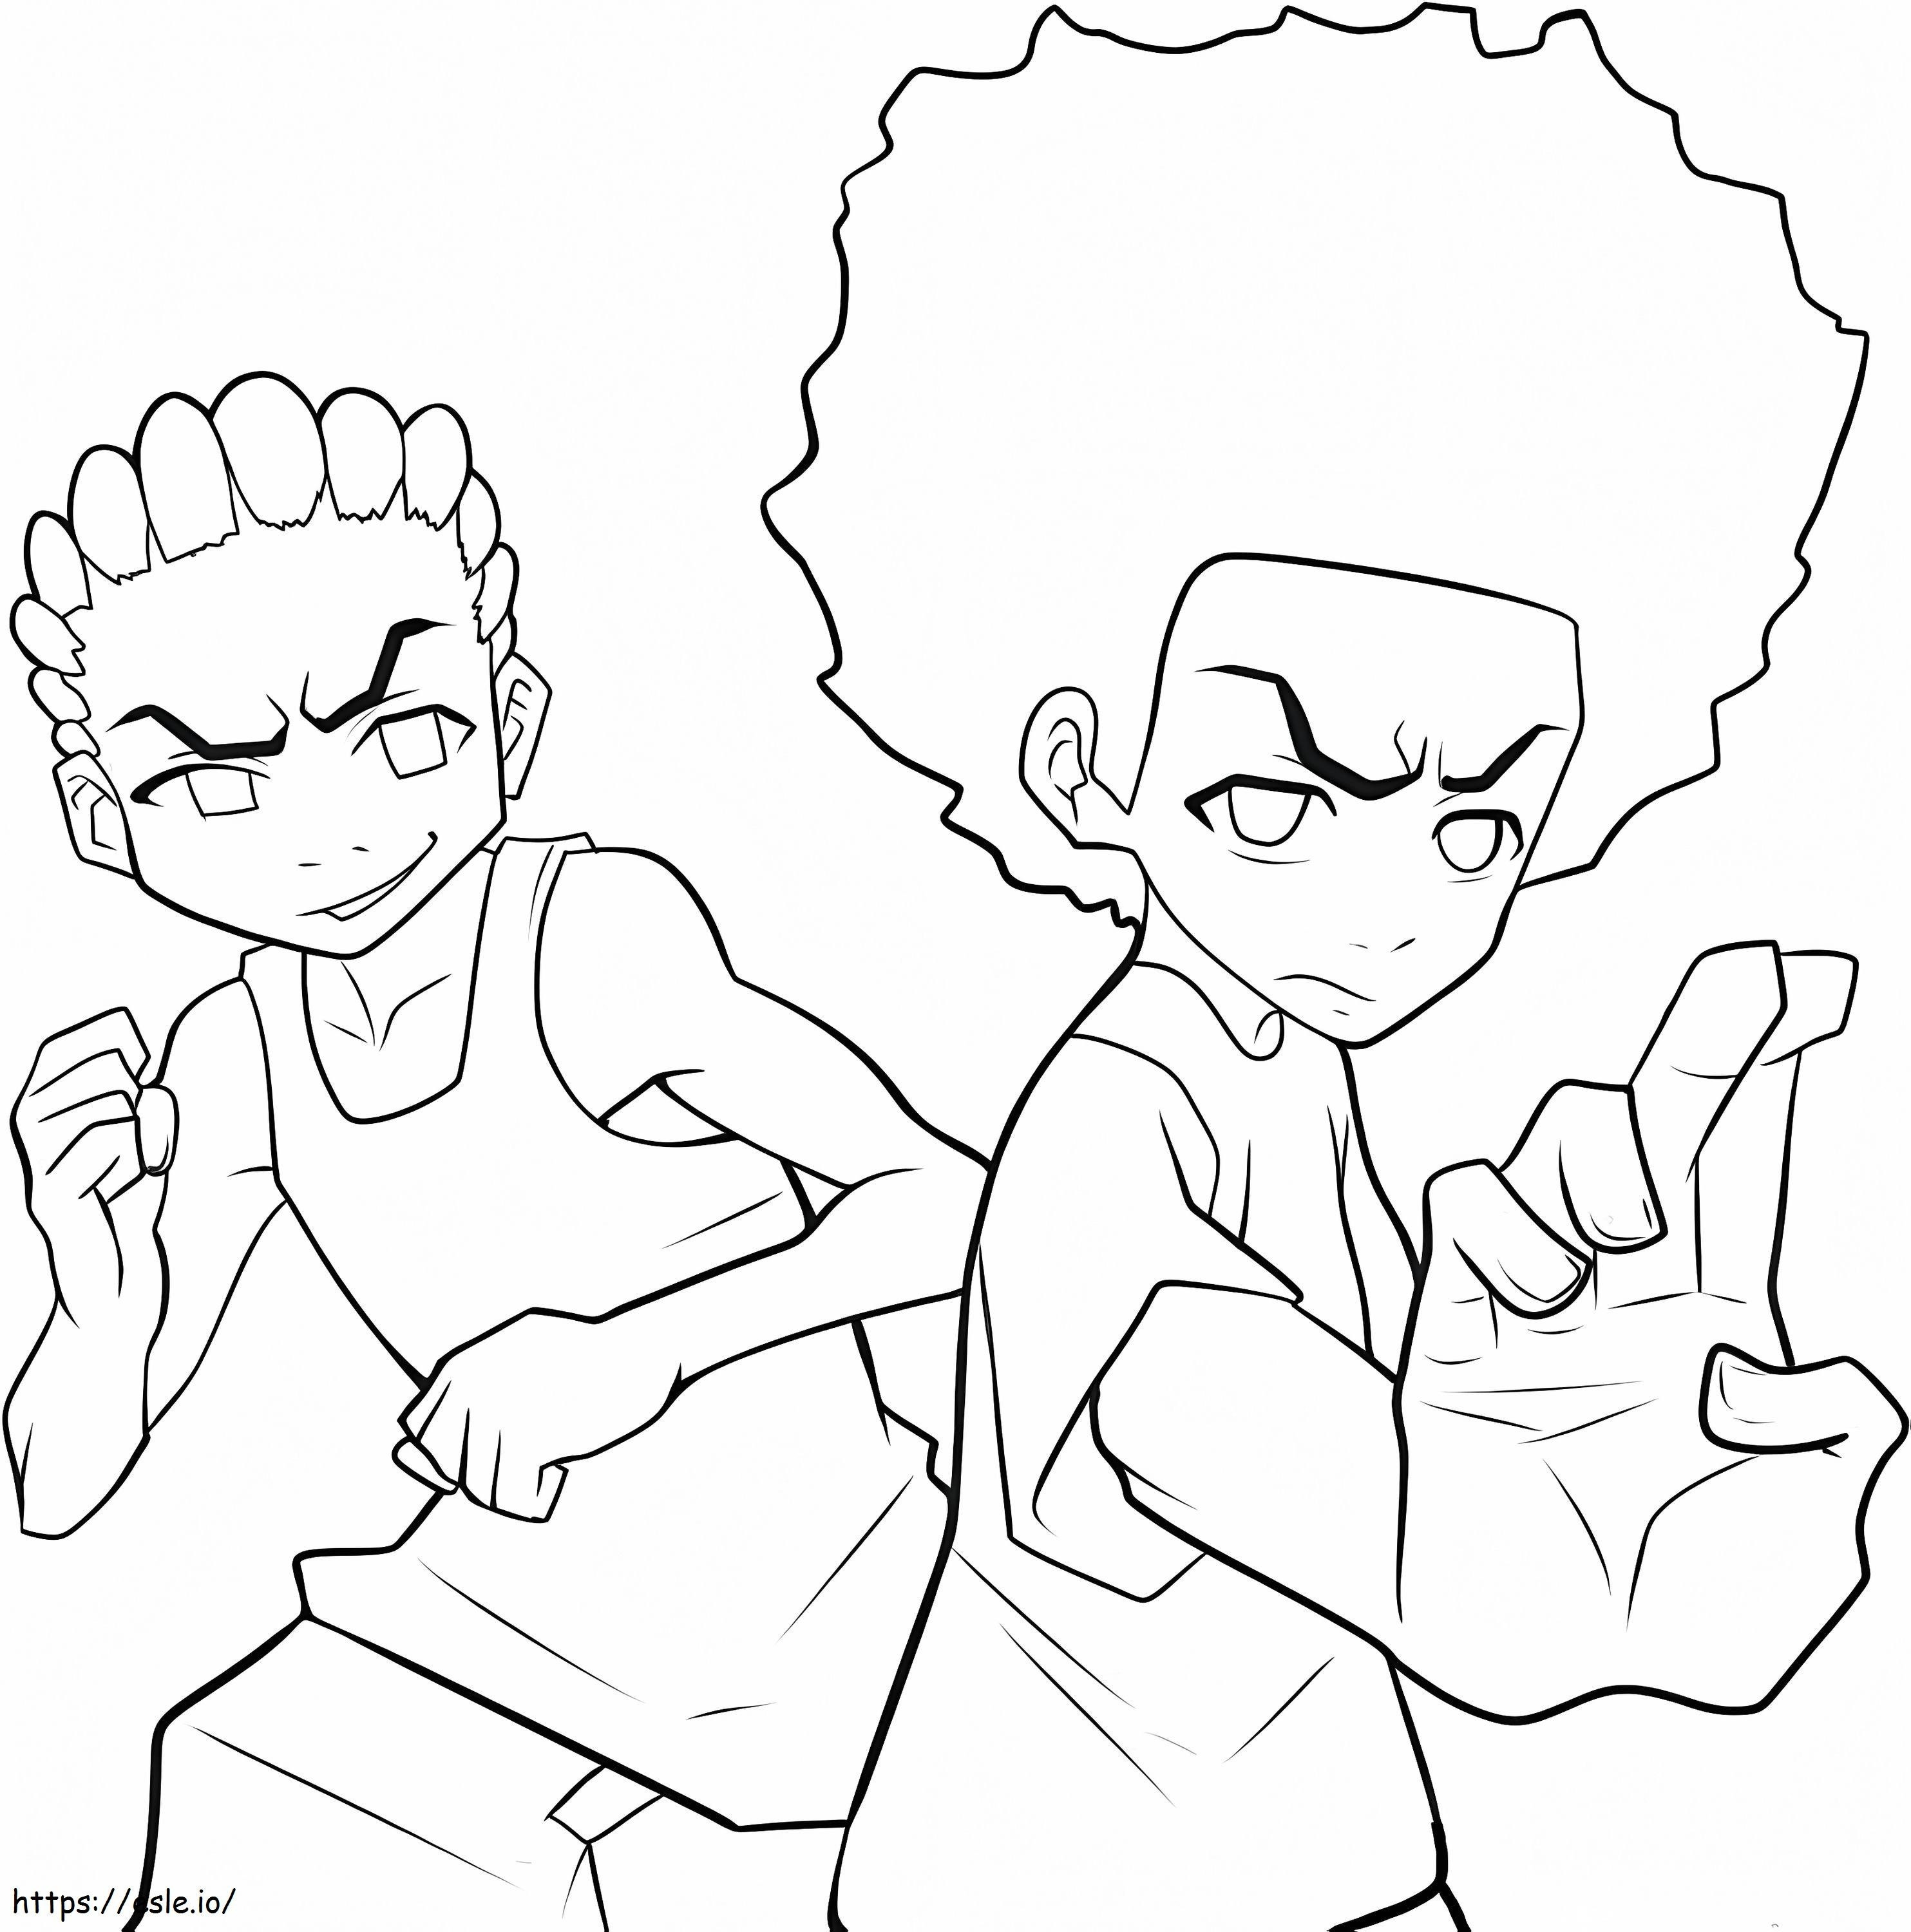 Huey And Riley Freeman From Boondocks coloring page